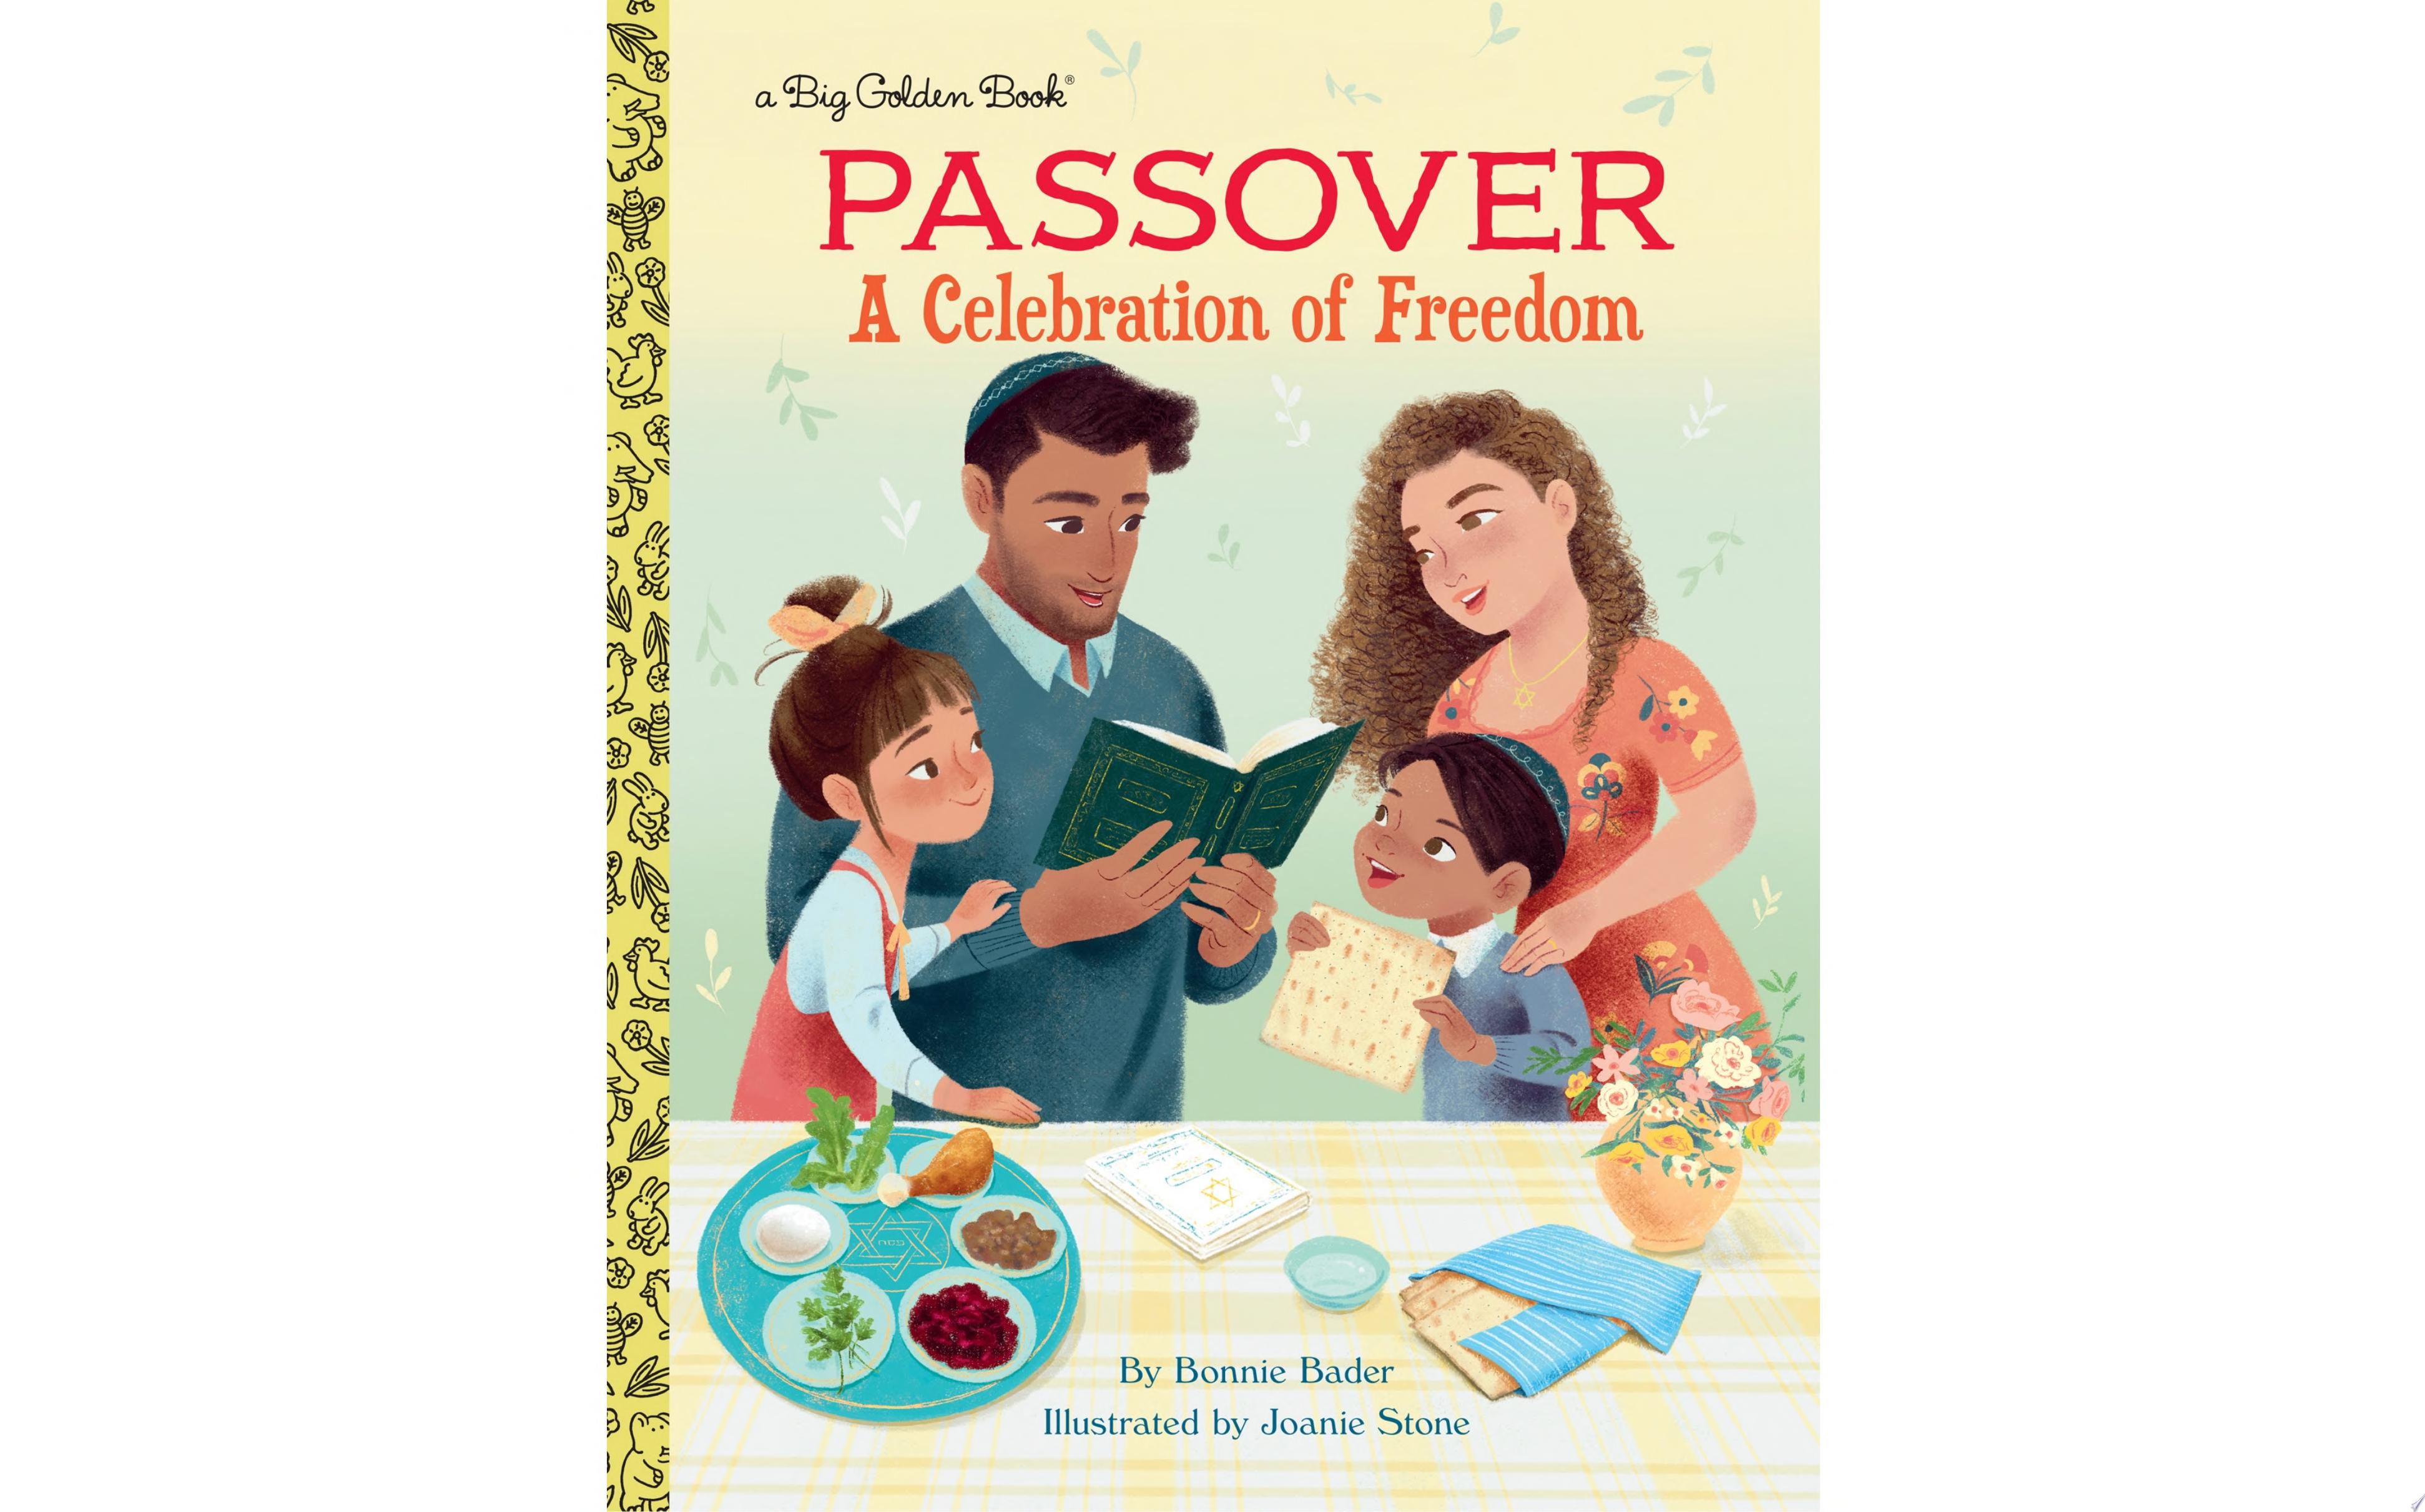 Image for "Passover: A Celebration of Freedom"